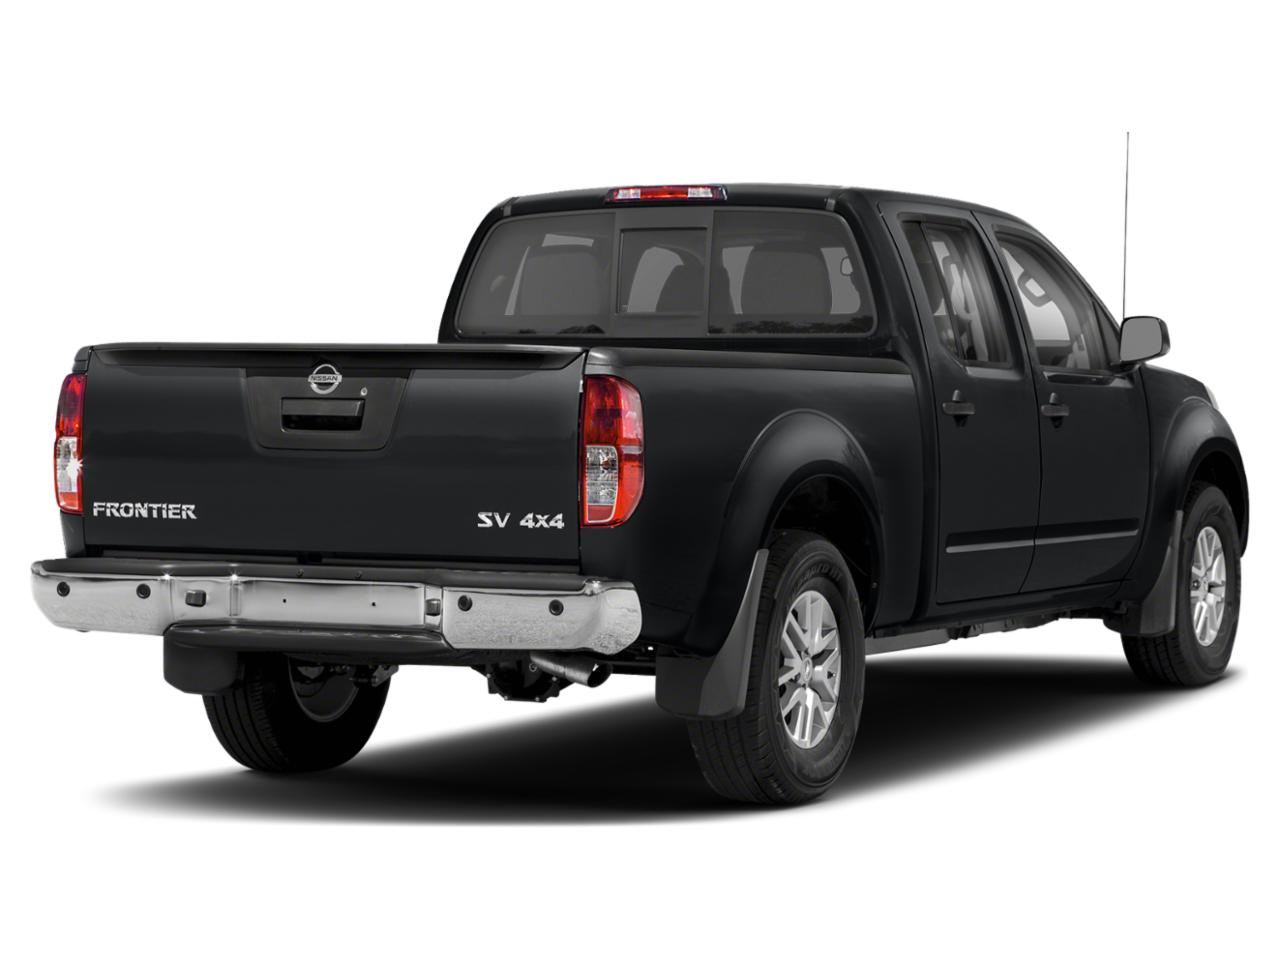 New 2021 Nissan Frontier Crew Cab 4x4 Sv Auto In Magnetic Black Pearl